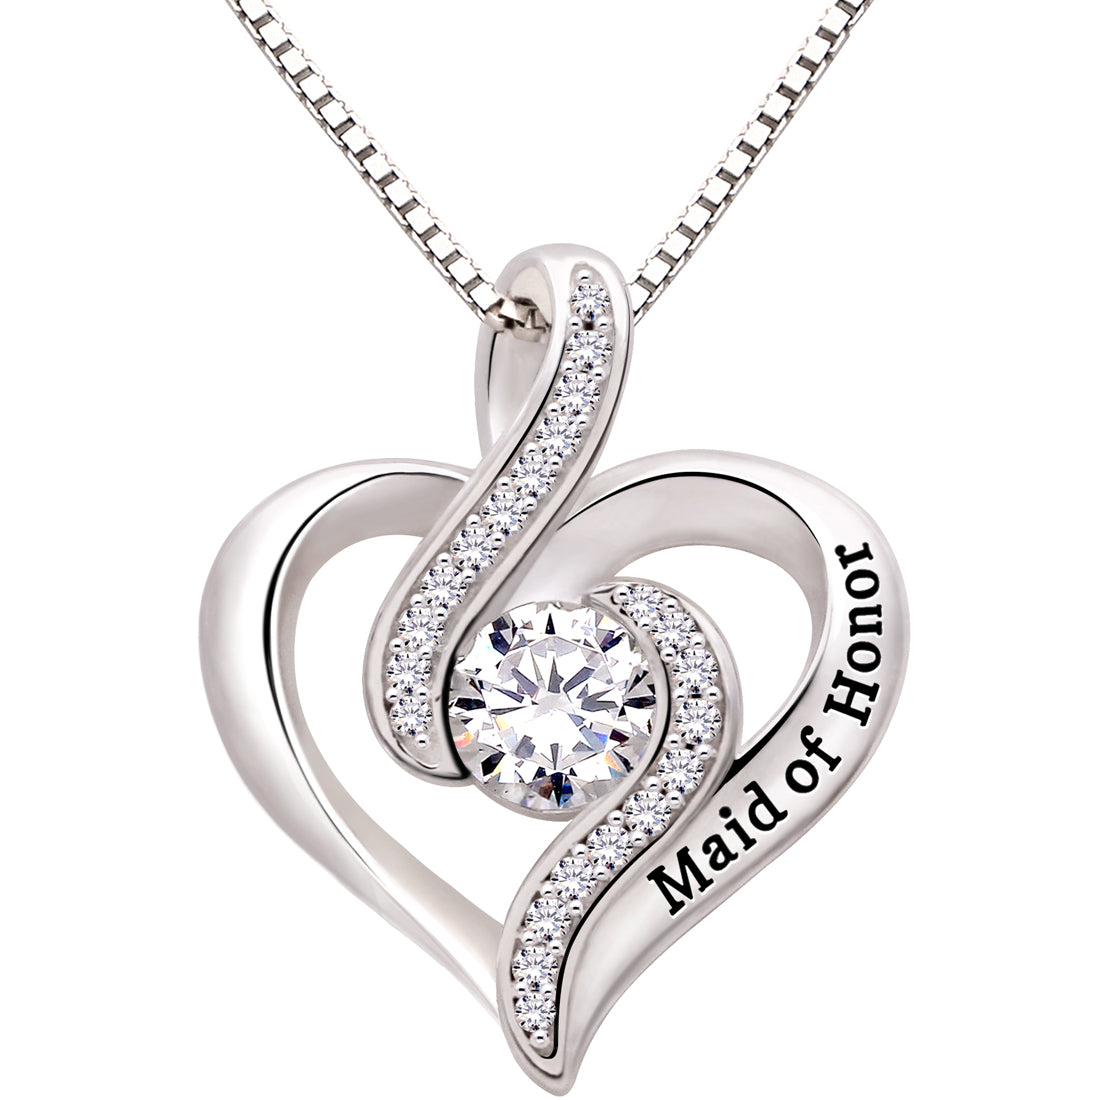 ALOV Jewelry Sterling Silver Maid of Honor Cubic Zirconia Pendant Necklace